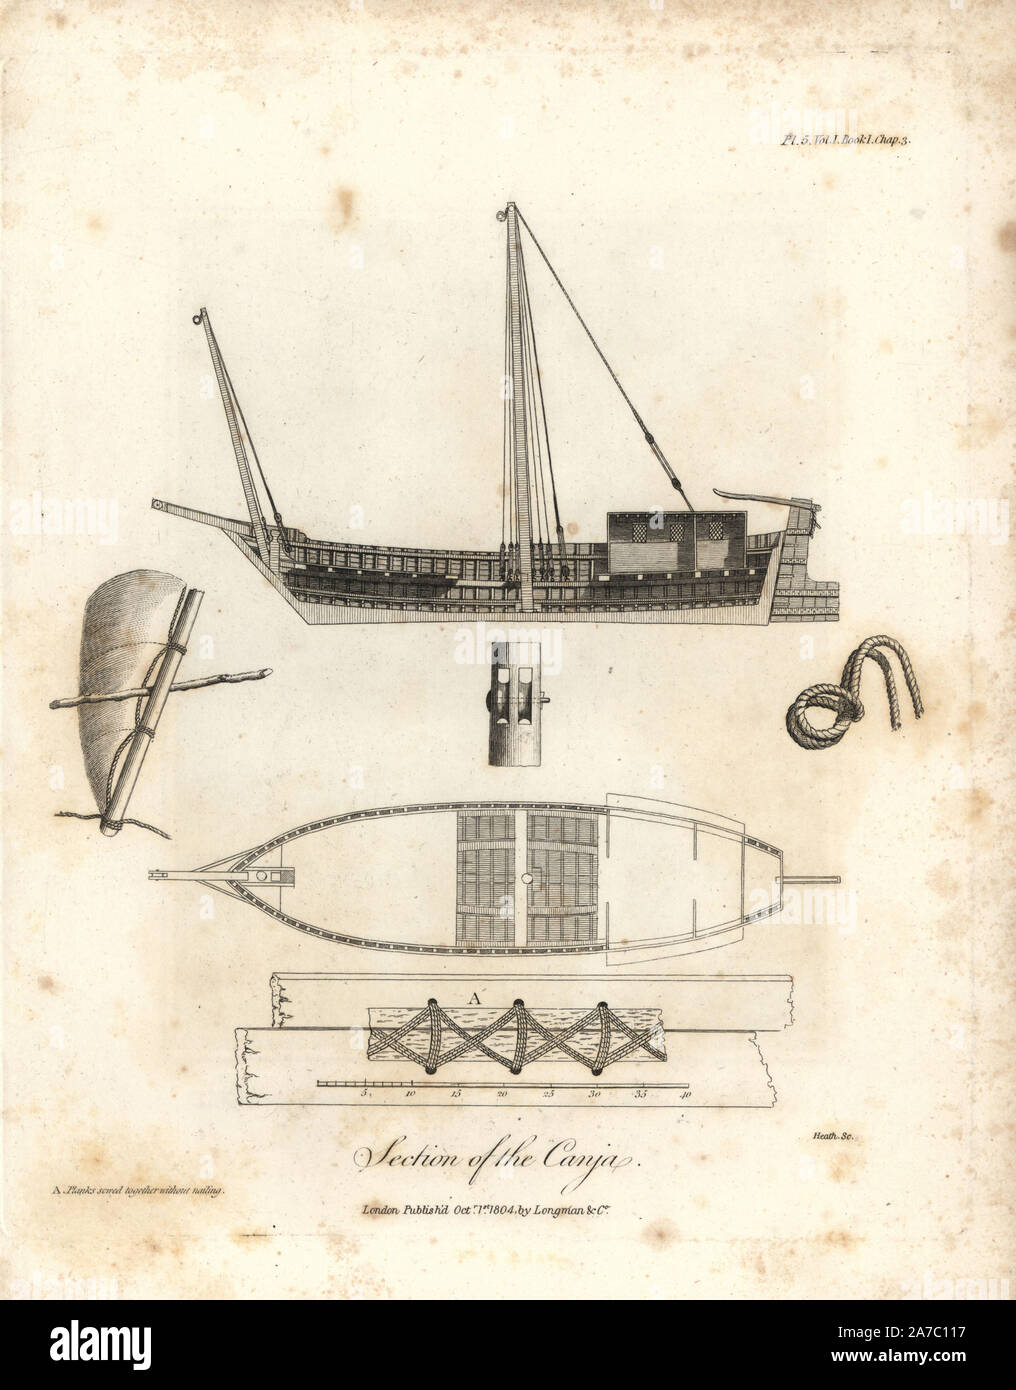 Sections of an Egyptian canja boat, vertical and horizontal, showing rope, winch, sail and planks secured without nails. Copperplate engraving from James Bruce's 'Travels to Discover the Source of the Nile, in the years 1768, 1769, 1770, 1771, 1772 and 1773,' London, 1790. James Bruce (1730-1794) was a Scottish explorer and travel writer who spent more than 12 years in North Africa and Ethiopia. Engraved by Heath after an original drawing by Bruce. Stock Photo